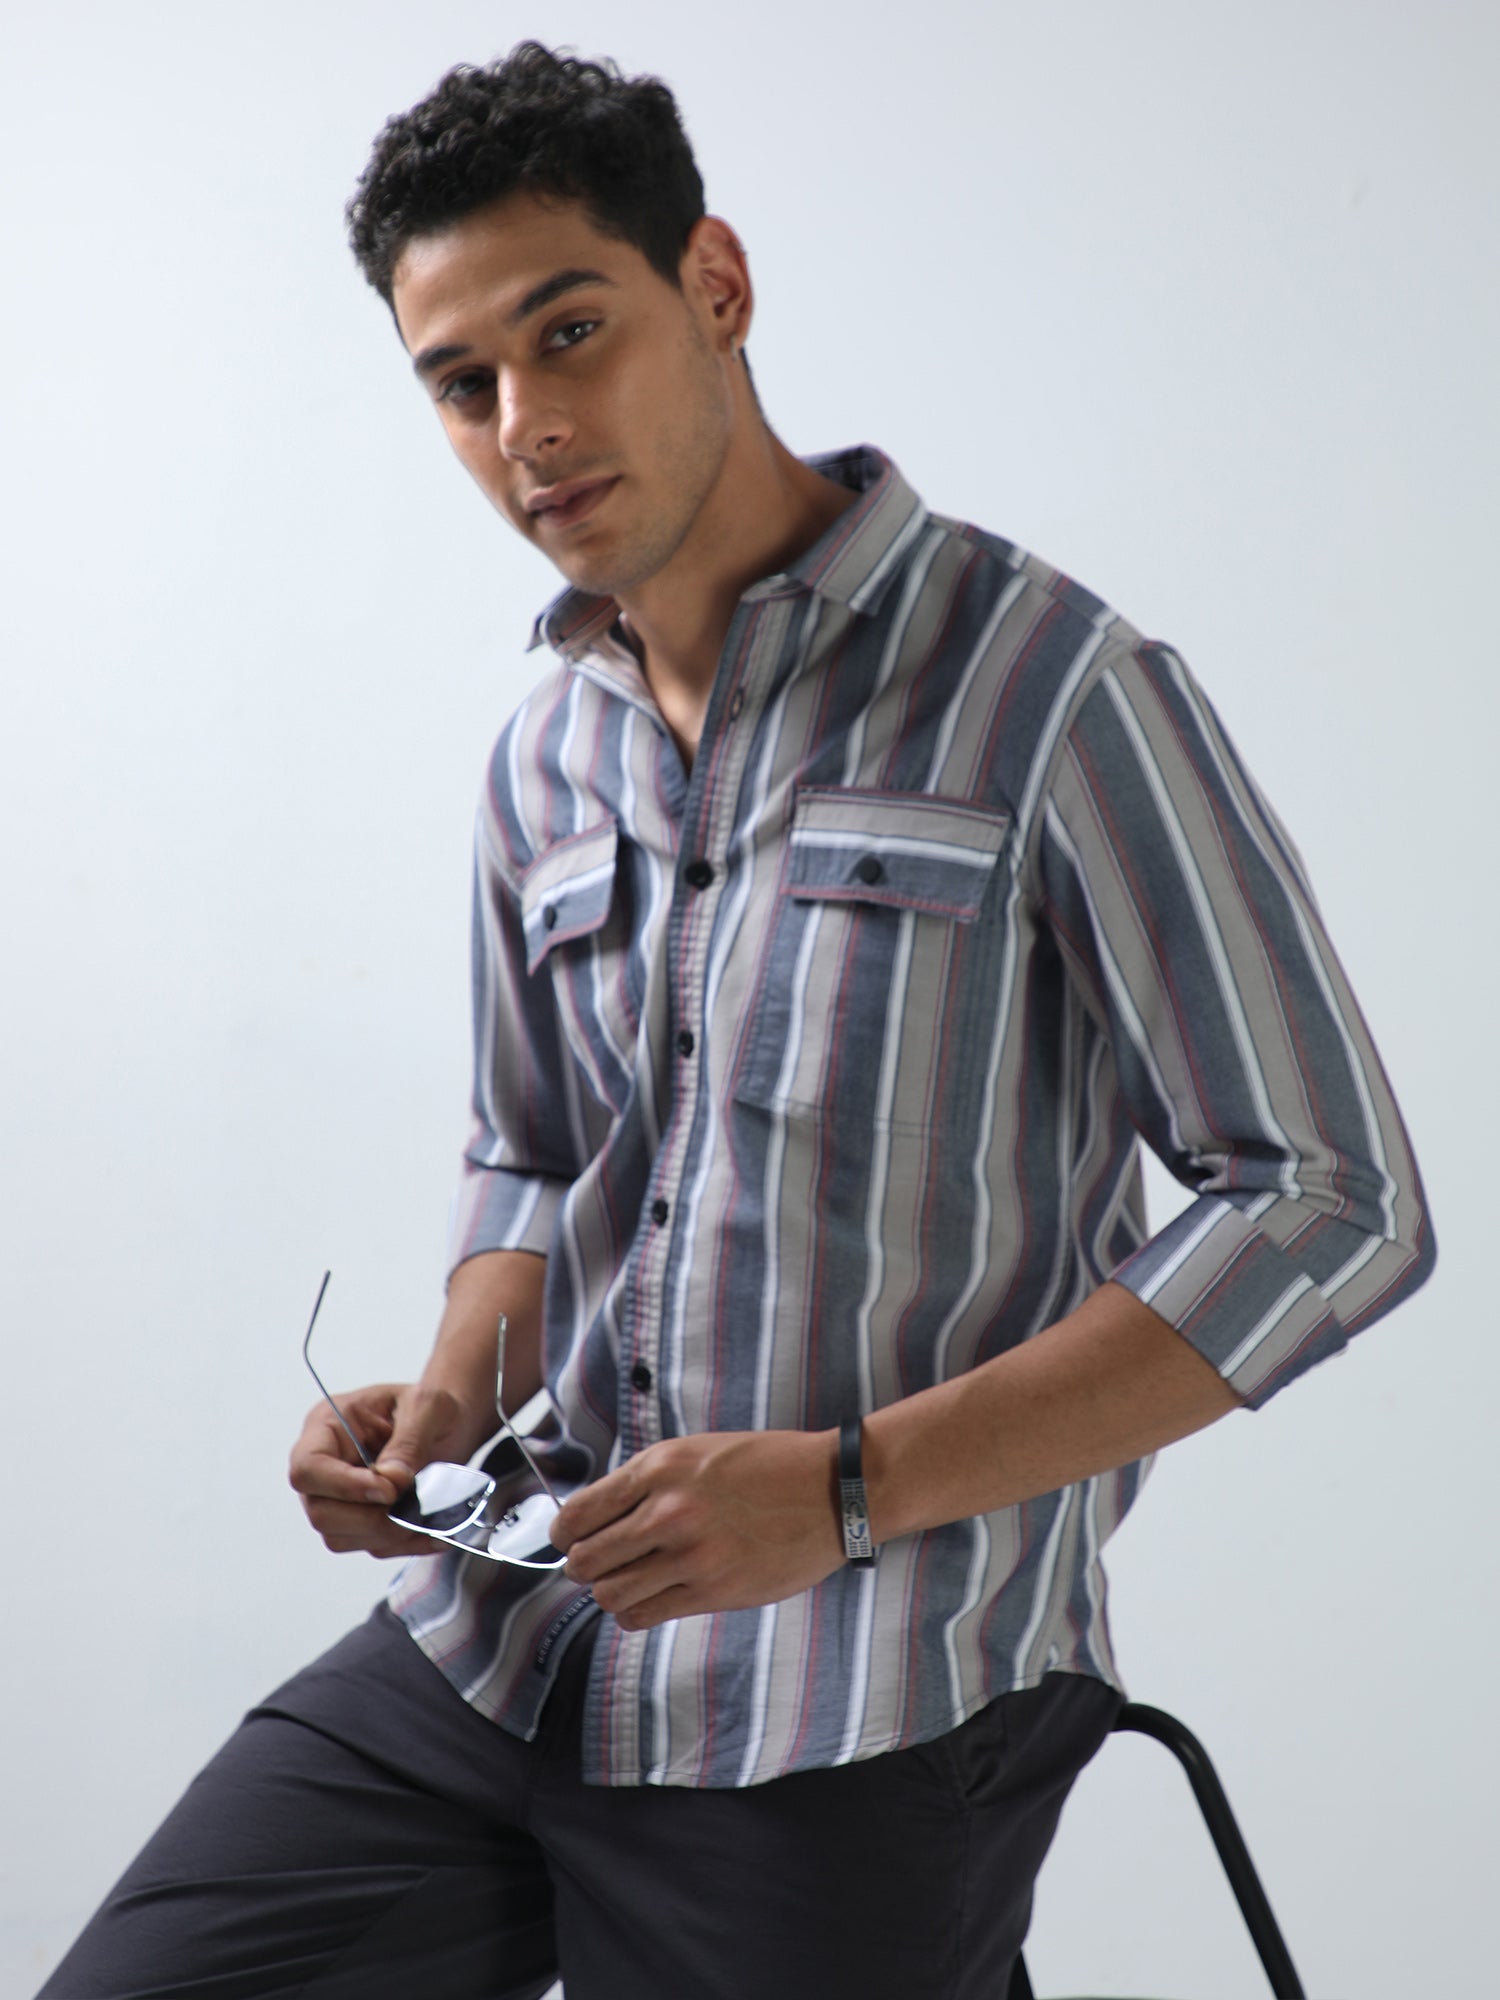 Shop Latest Double Pocket Striped Shirt For Men OnlineRs. 1349.00